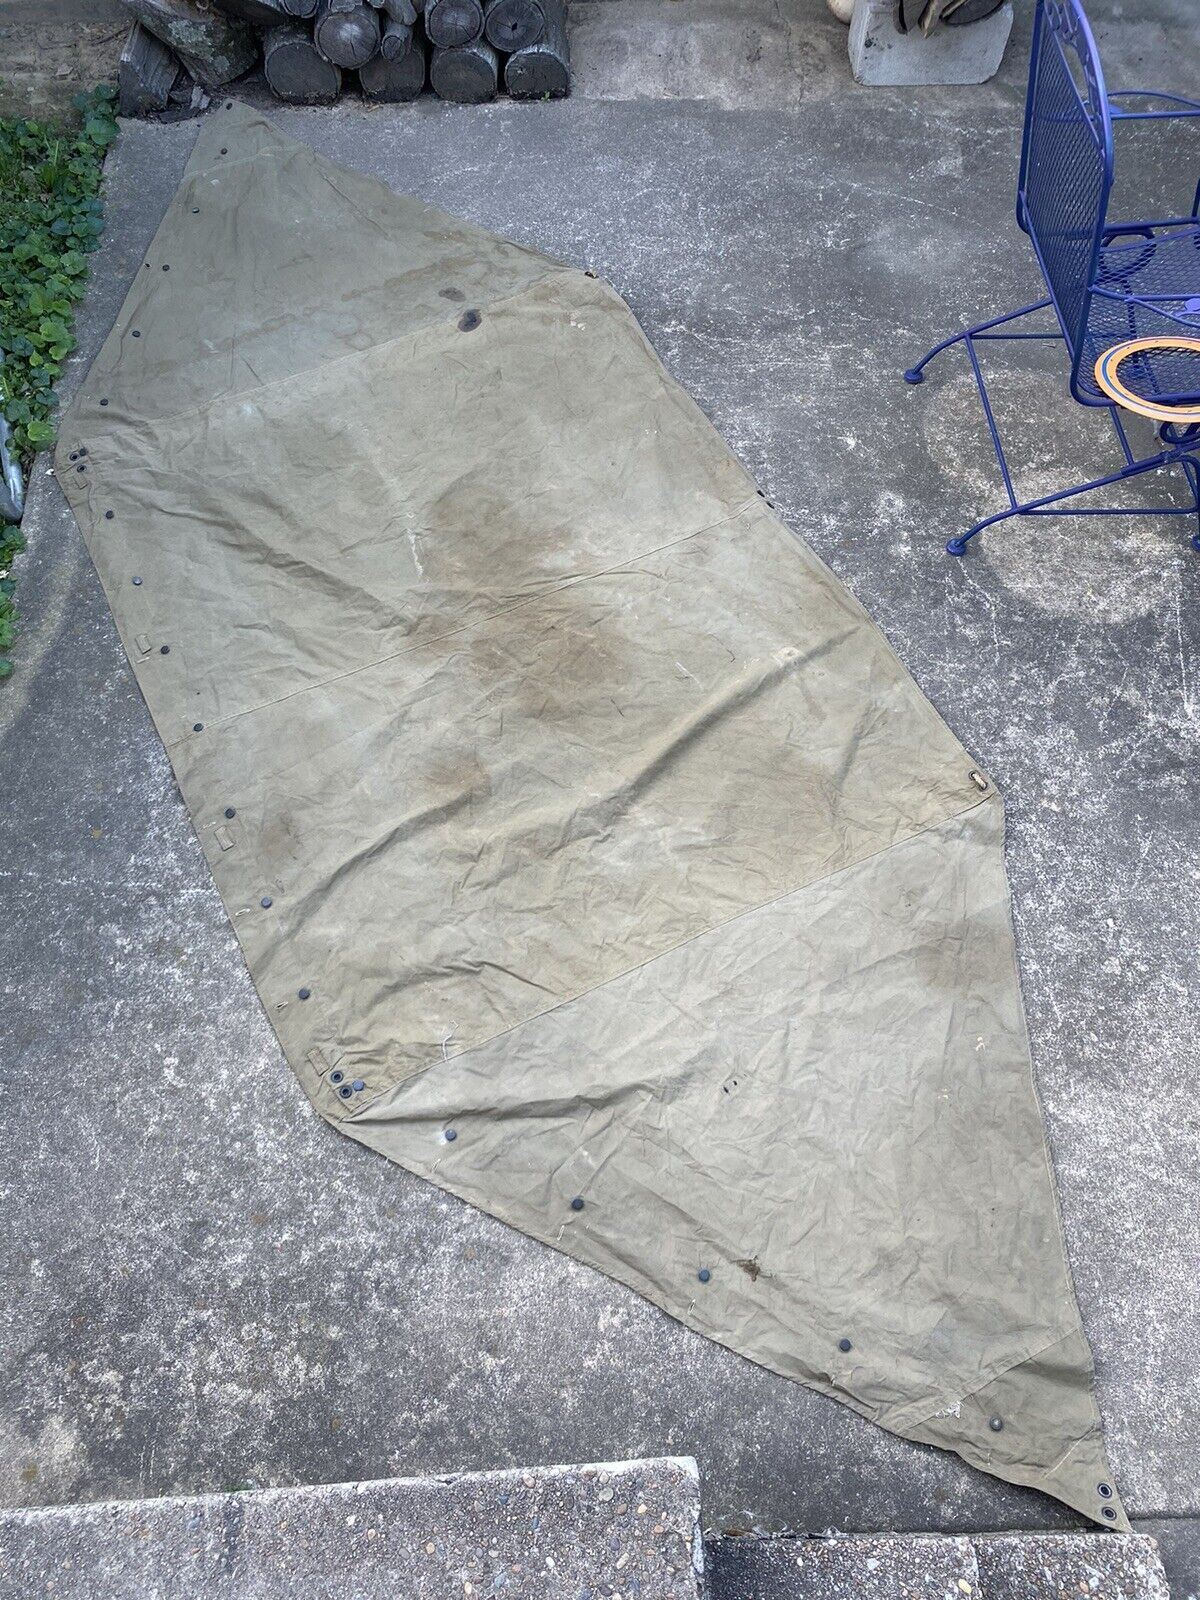 Vintage US Army 2 Man Pup Tent Shelter Piece Section USMC Original WWII Canvas